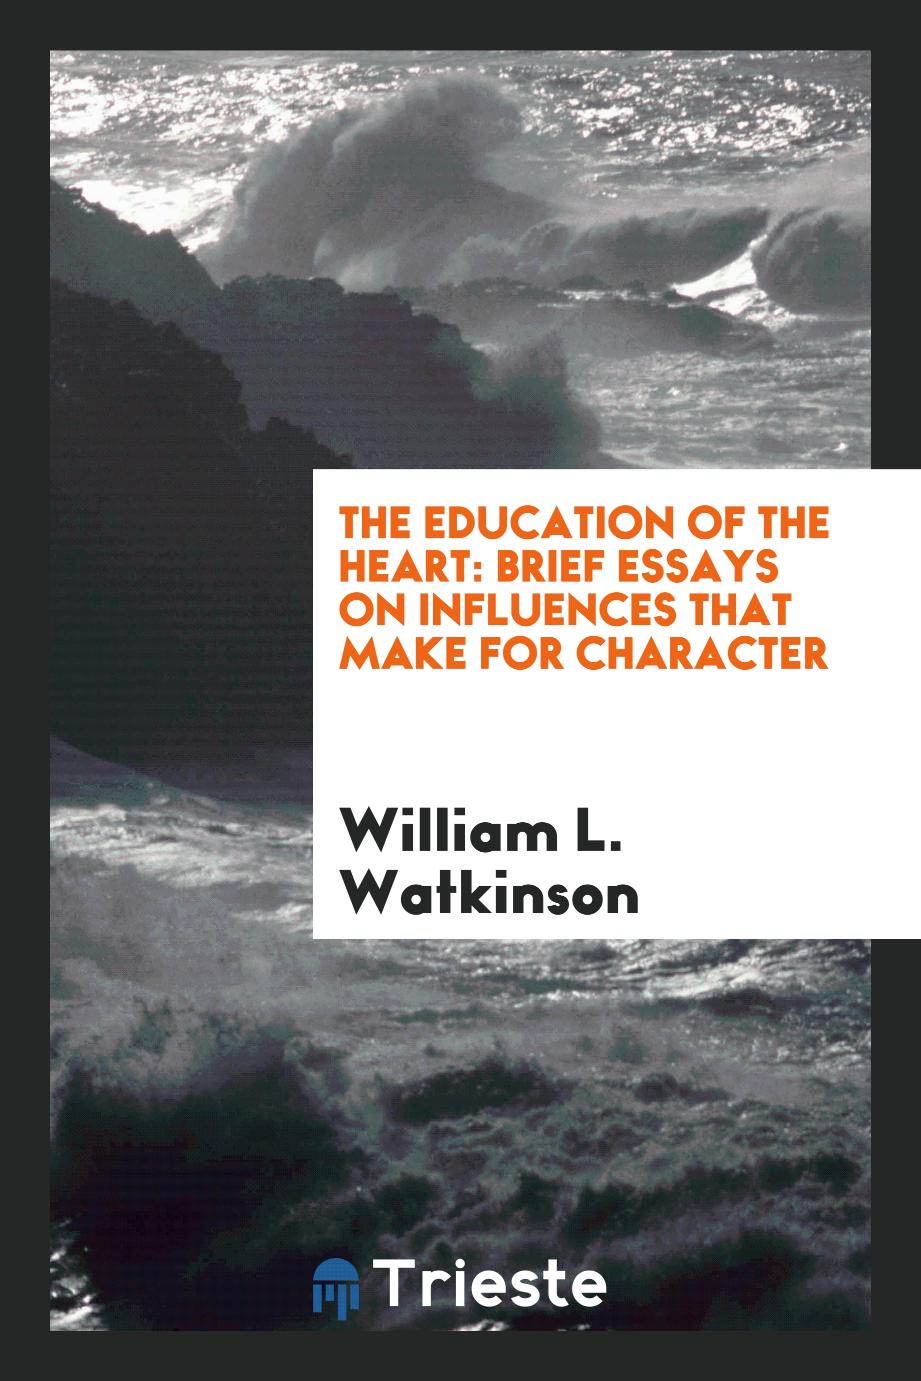 The education of the heart: brief essays on influences that make for character